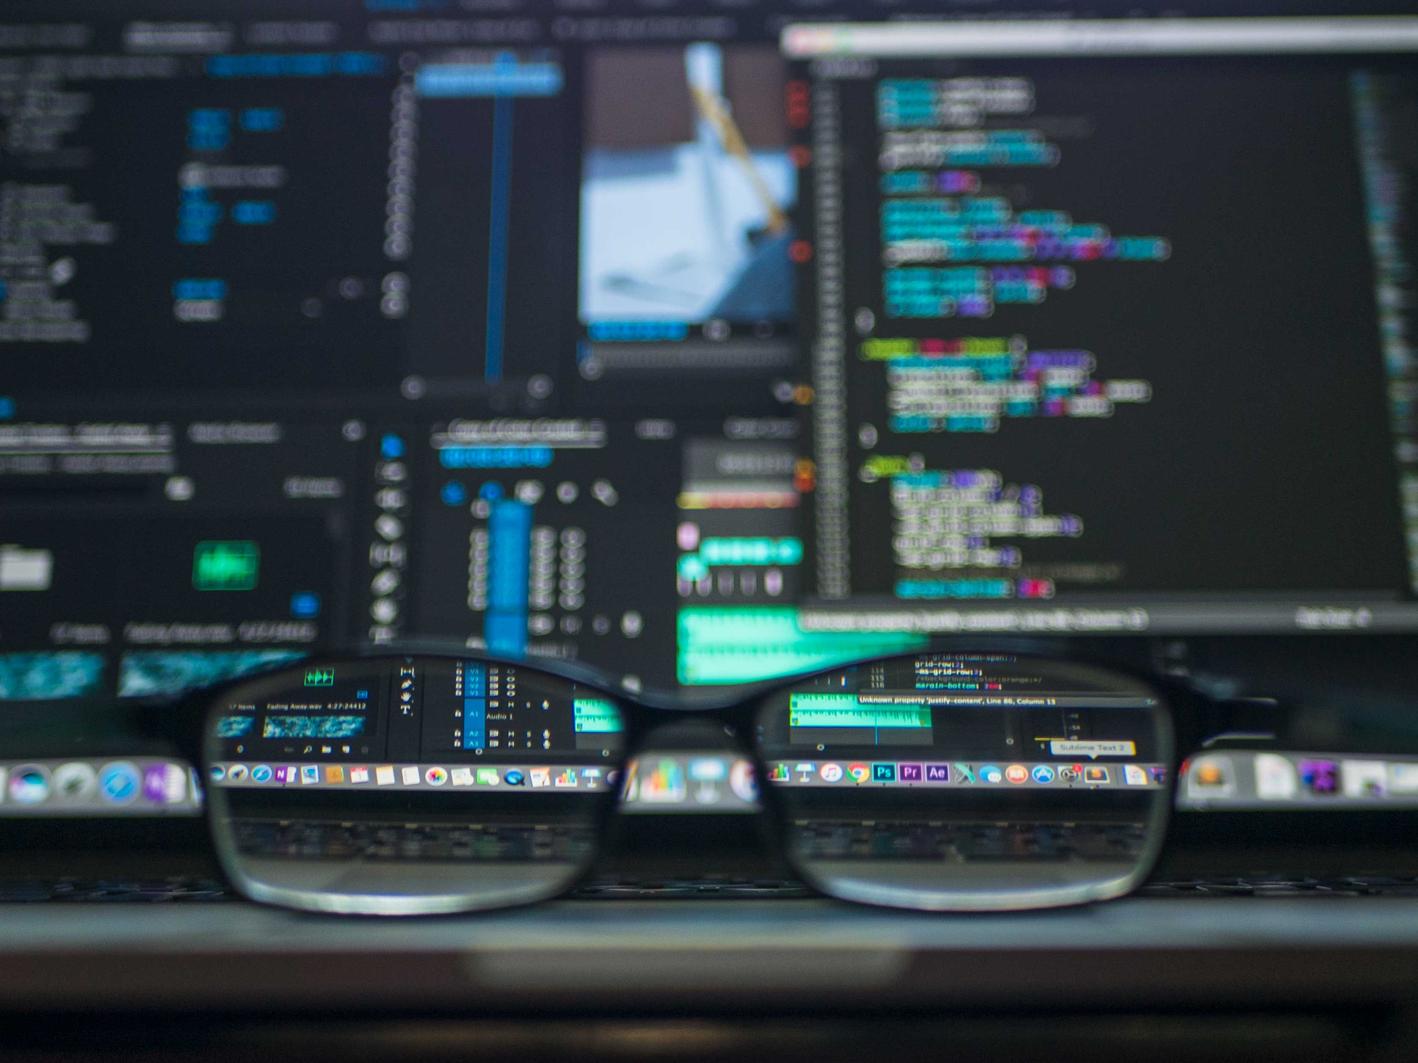 A photo of a pair of glasses in focus, with monitors showing code, blurred in the background